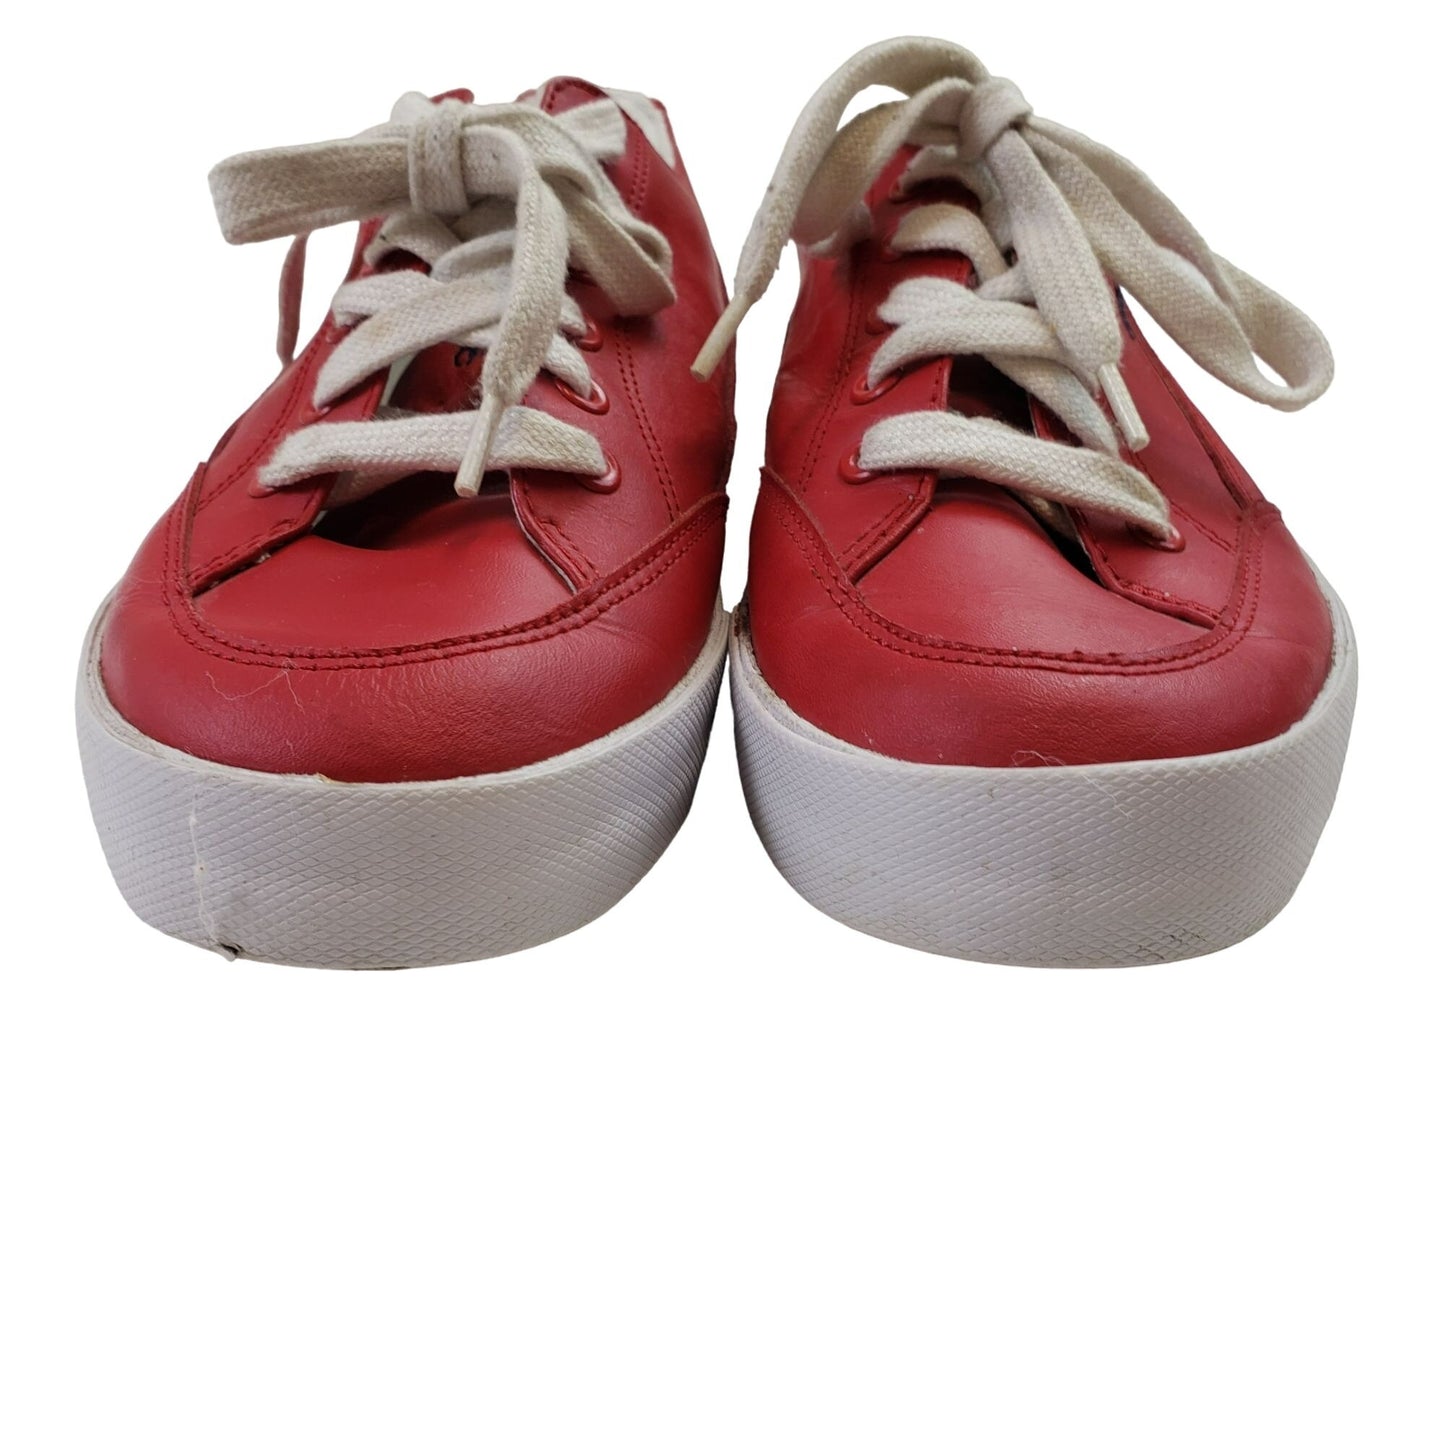 Polo by Ralph Lauren Red Leather Sneakers Size 9.5 D